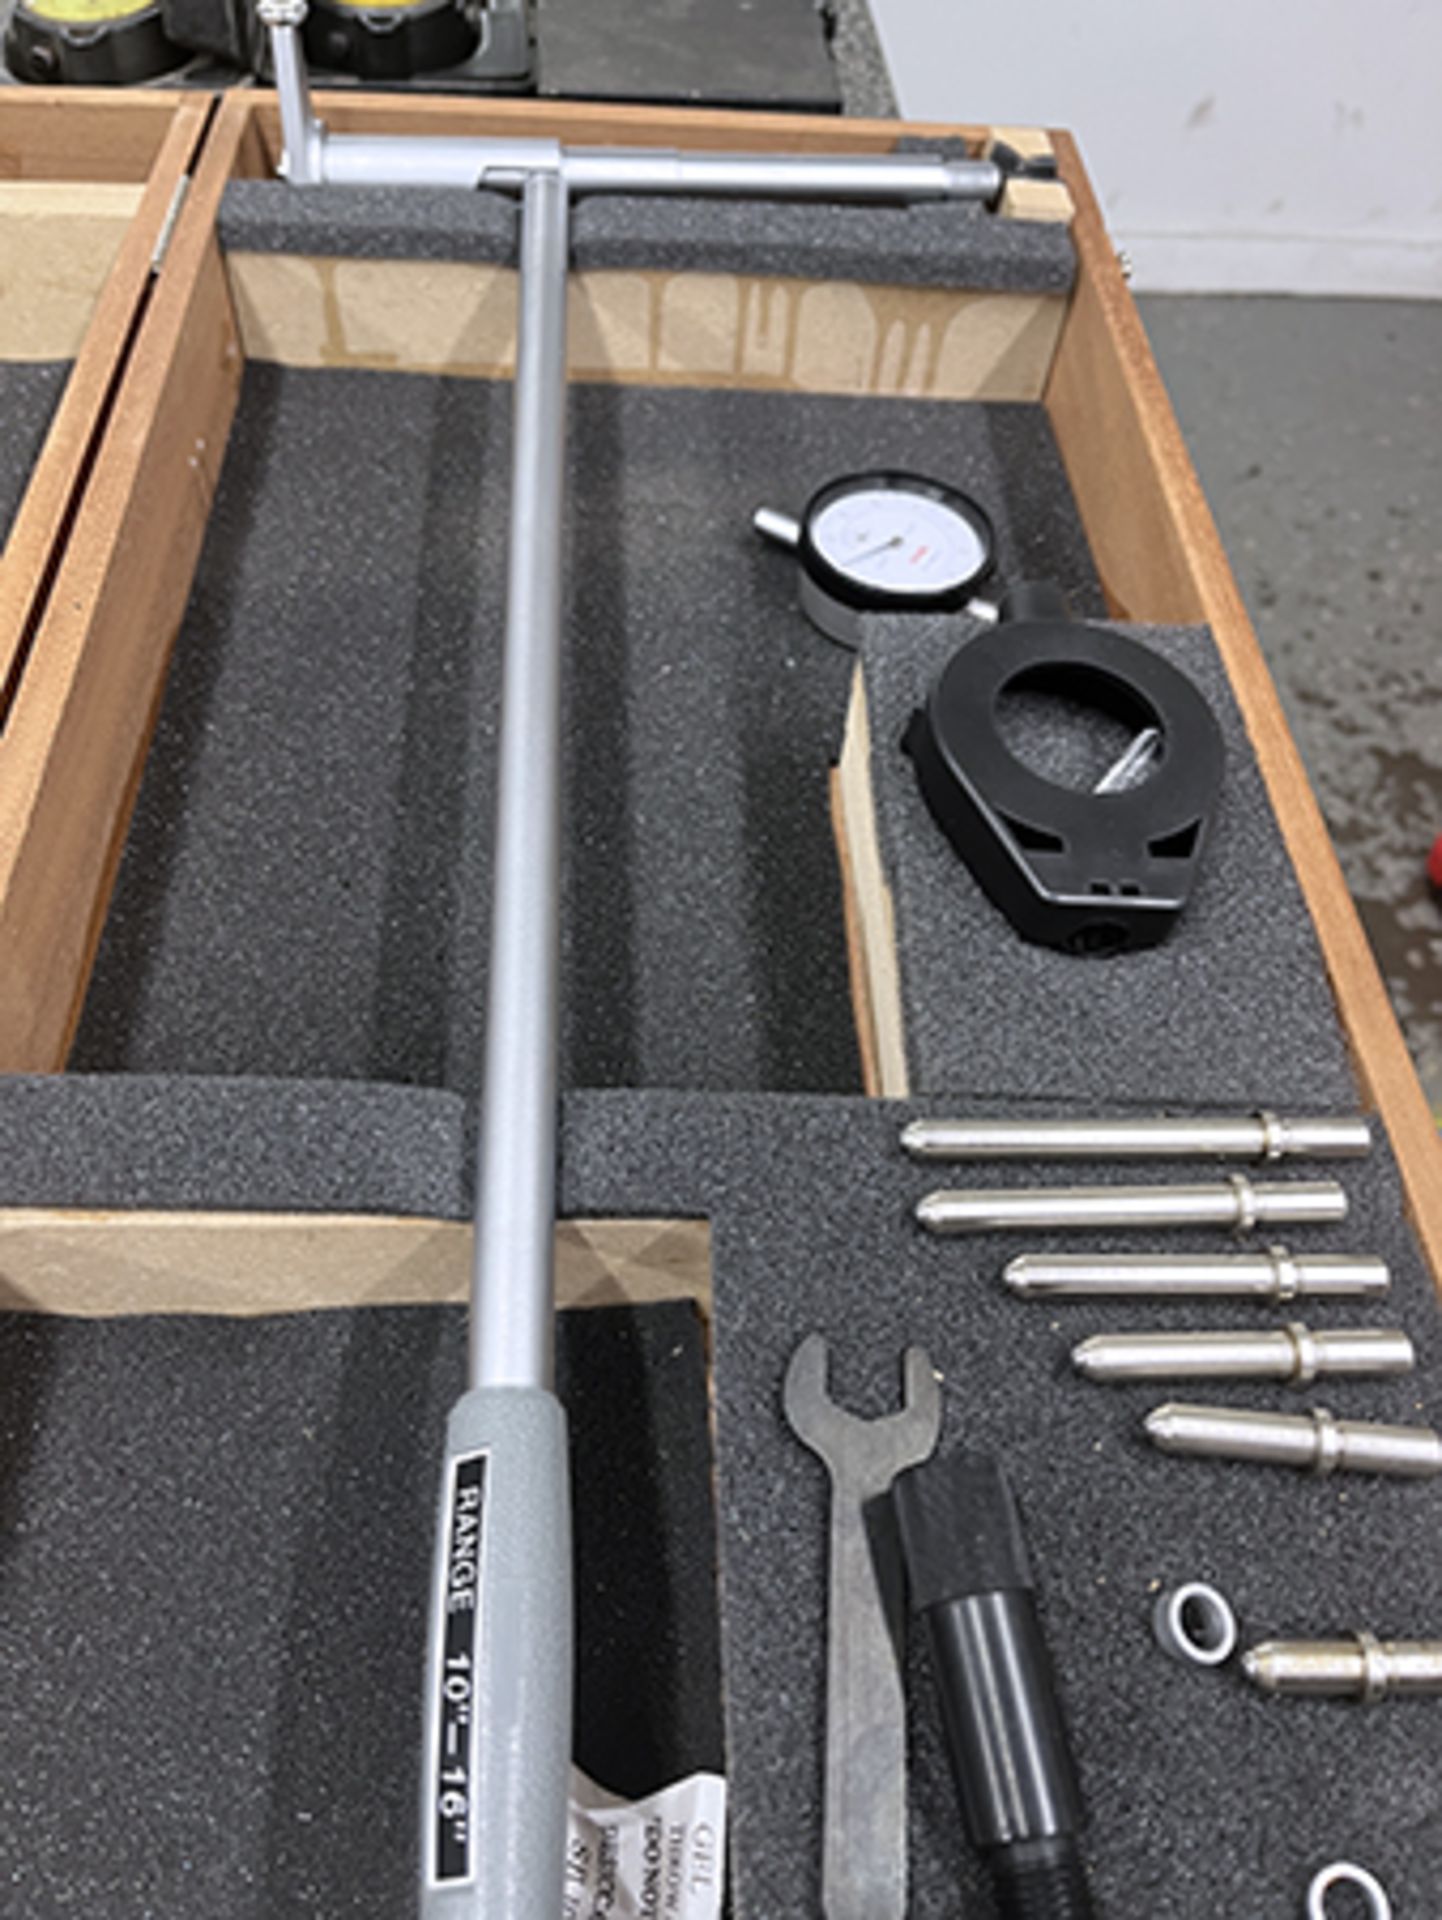 10-16" Bore Gage - Image 3 of 7